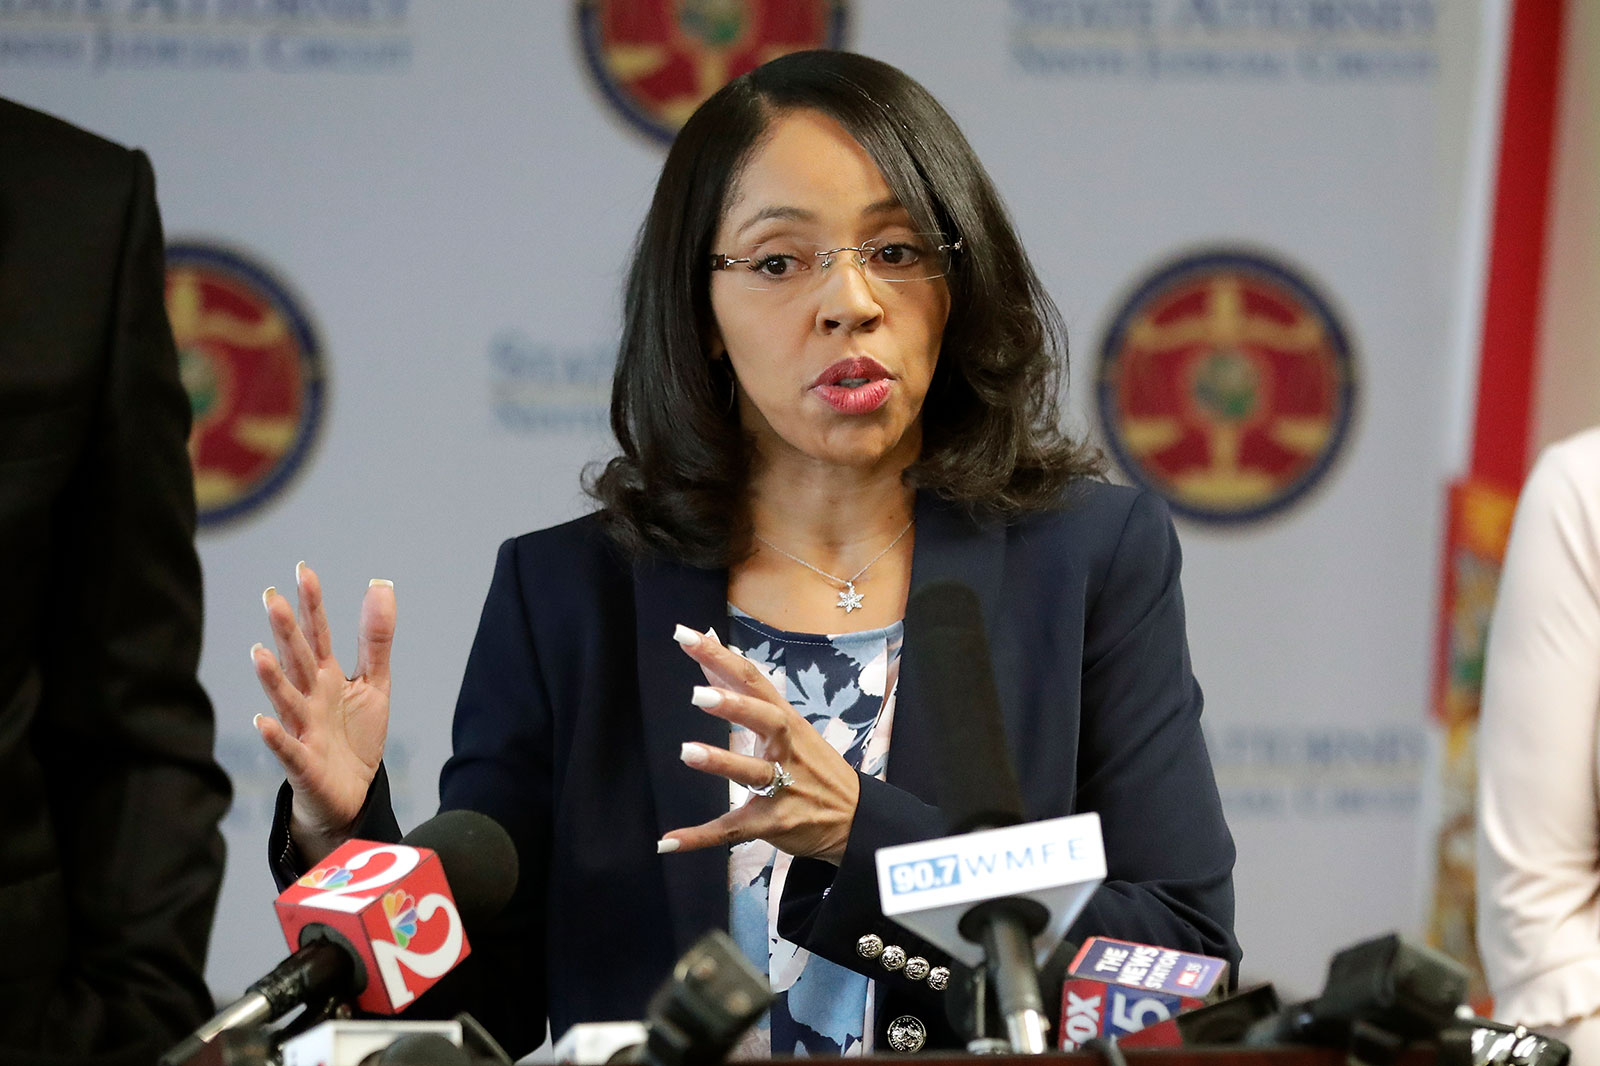 Then-State Attorney Aramis Ayala speaks at a news conference in 2019 in Orlando, Florida.